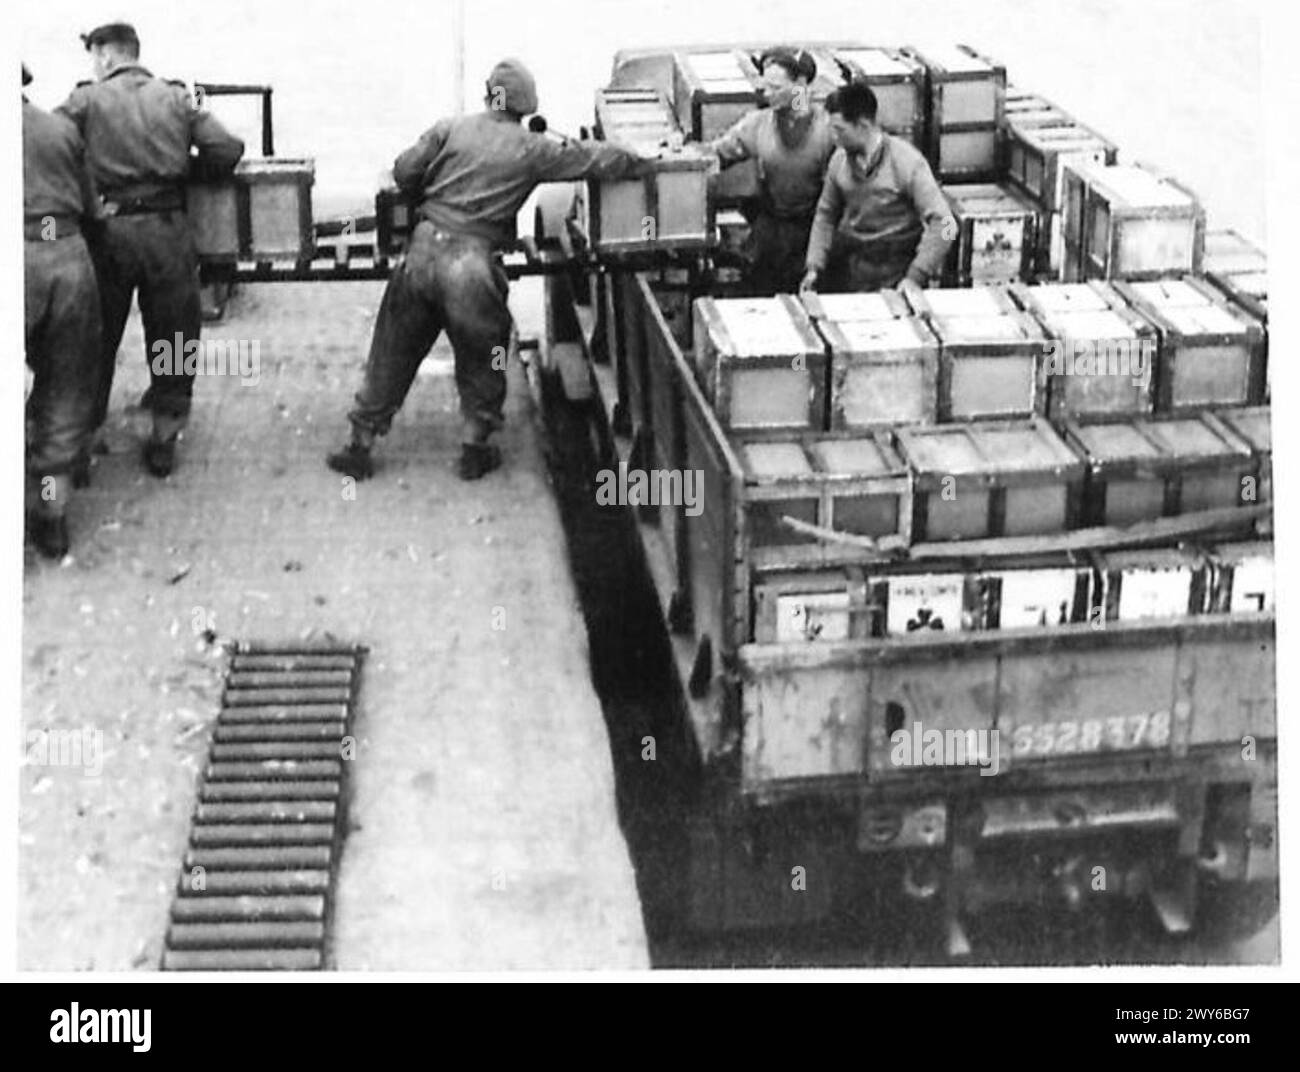 SPECIAL ASSIGNMENT FOR TN5 - Series of pictures showing the Dukws at work loading and unloading at Mulberry B. Approximate tonnage handled per day 2,700 tons. , British Army, 21st Army Group Stock Photo